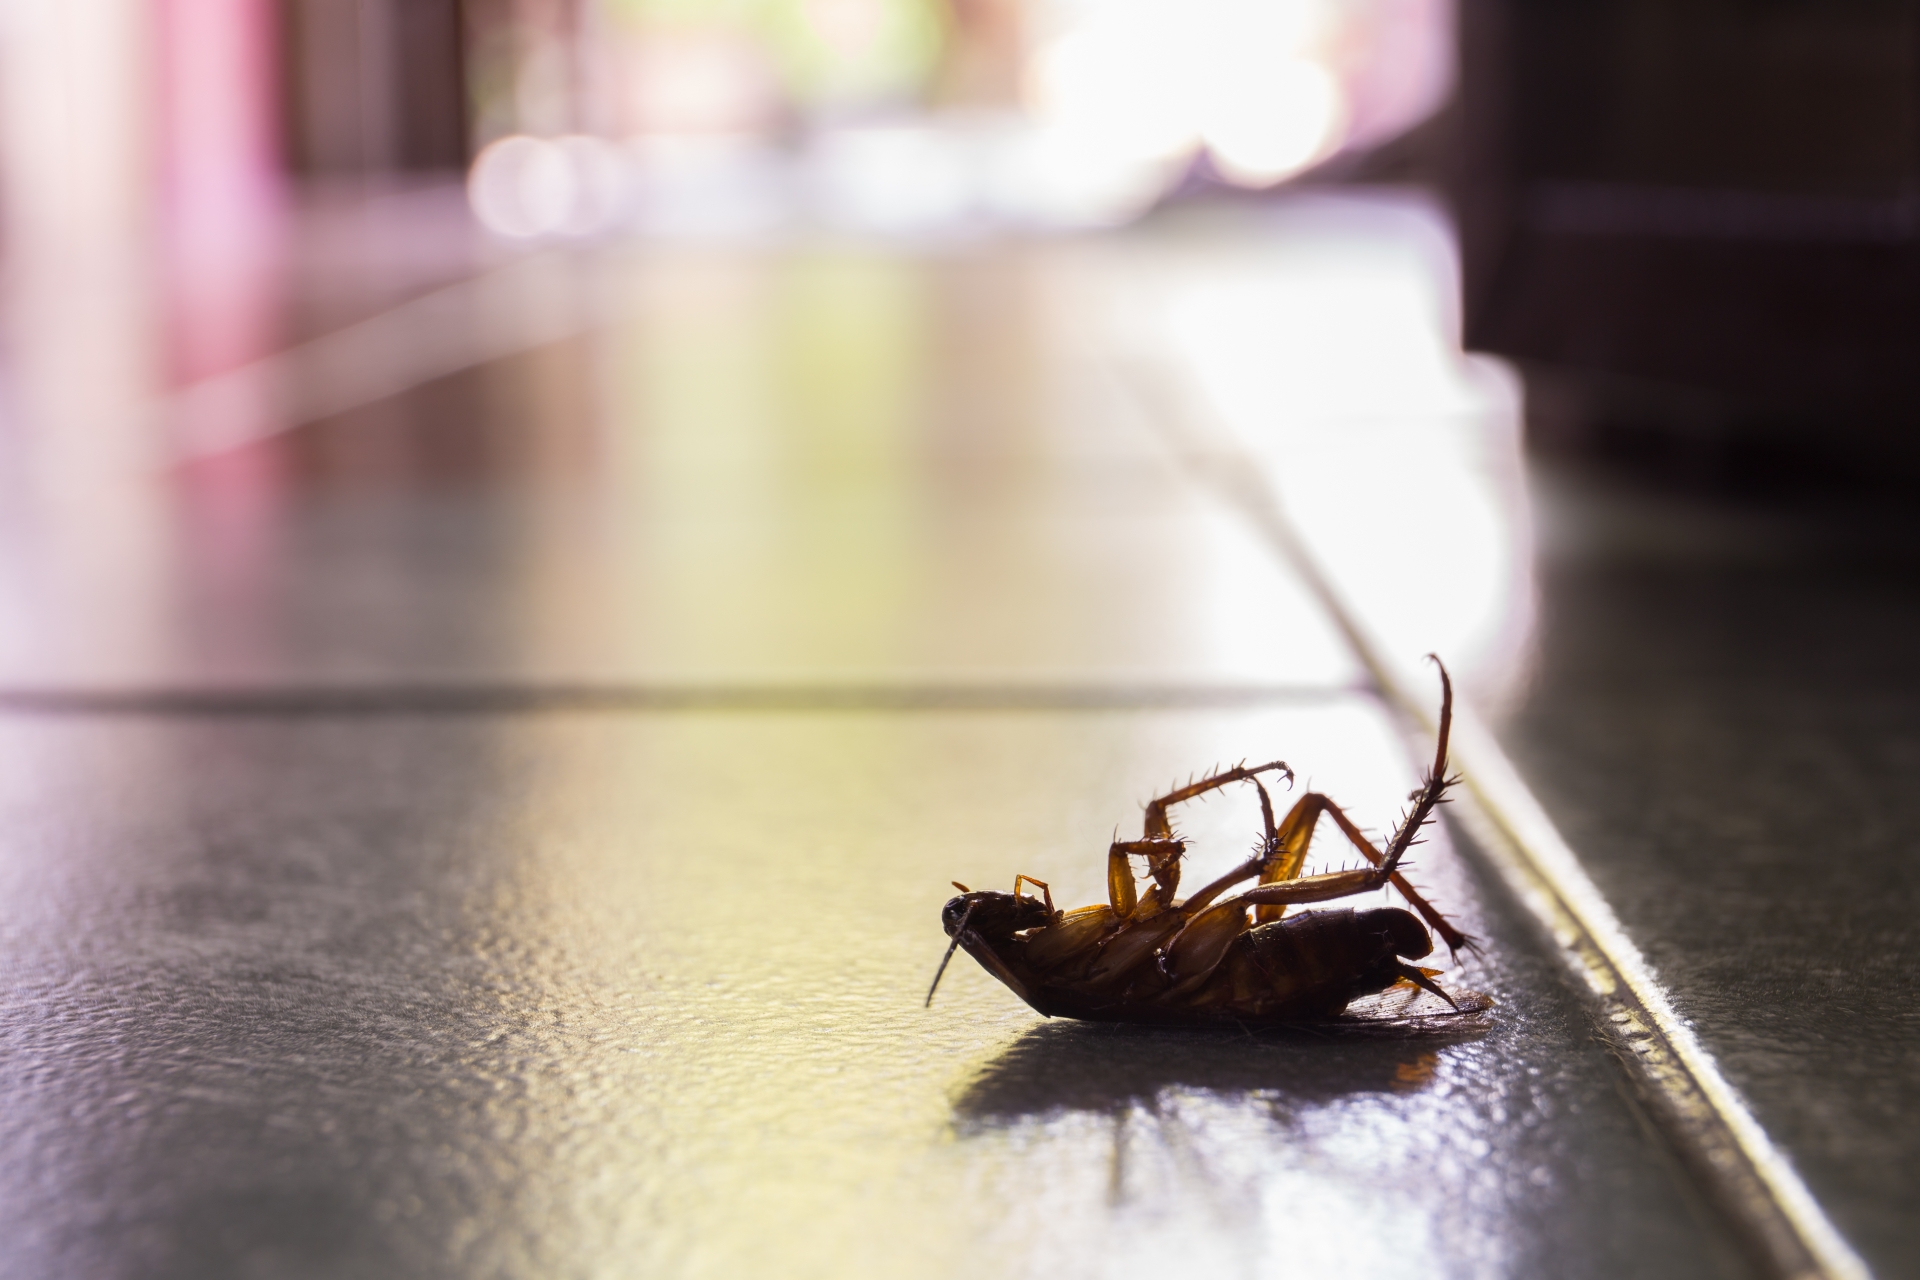 Cockroach Control, Pest Control in Poplar, Isle of Dogs, Millwall, E14. Call Now 020 8166 9746